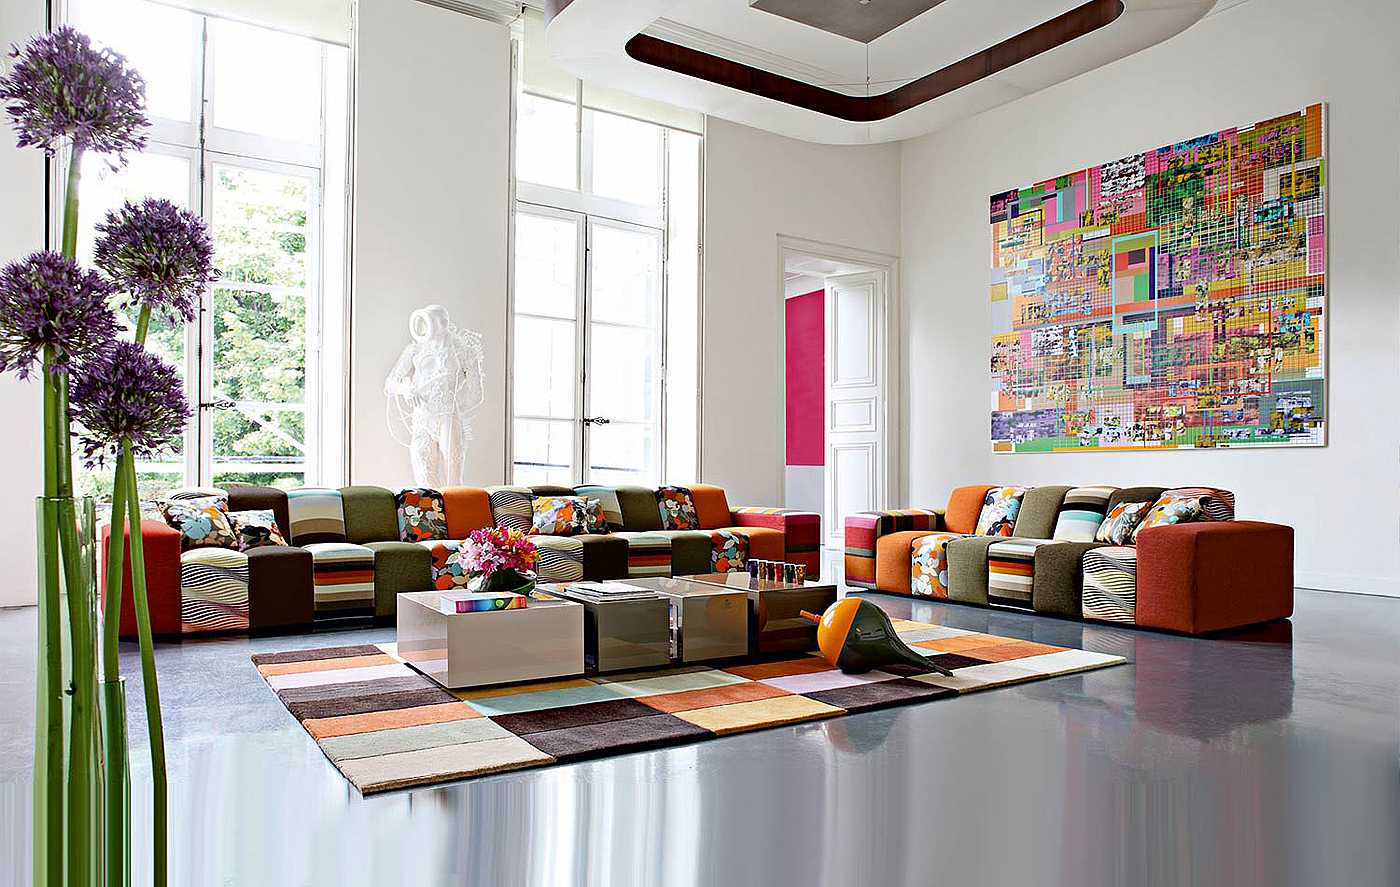 bright interior in the style of the avant-garde